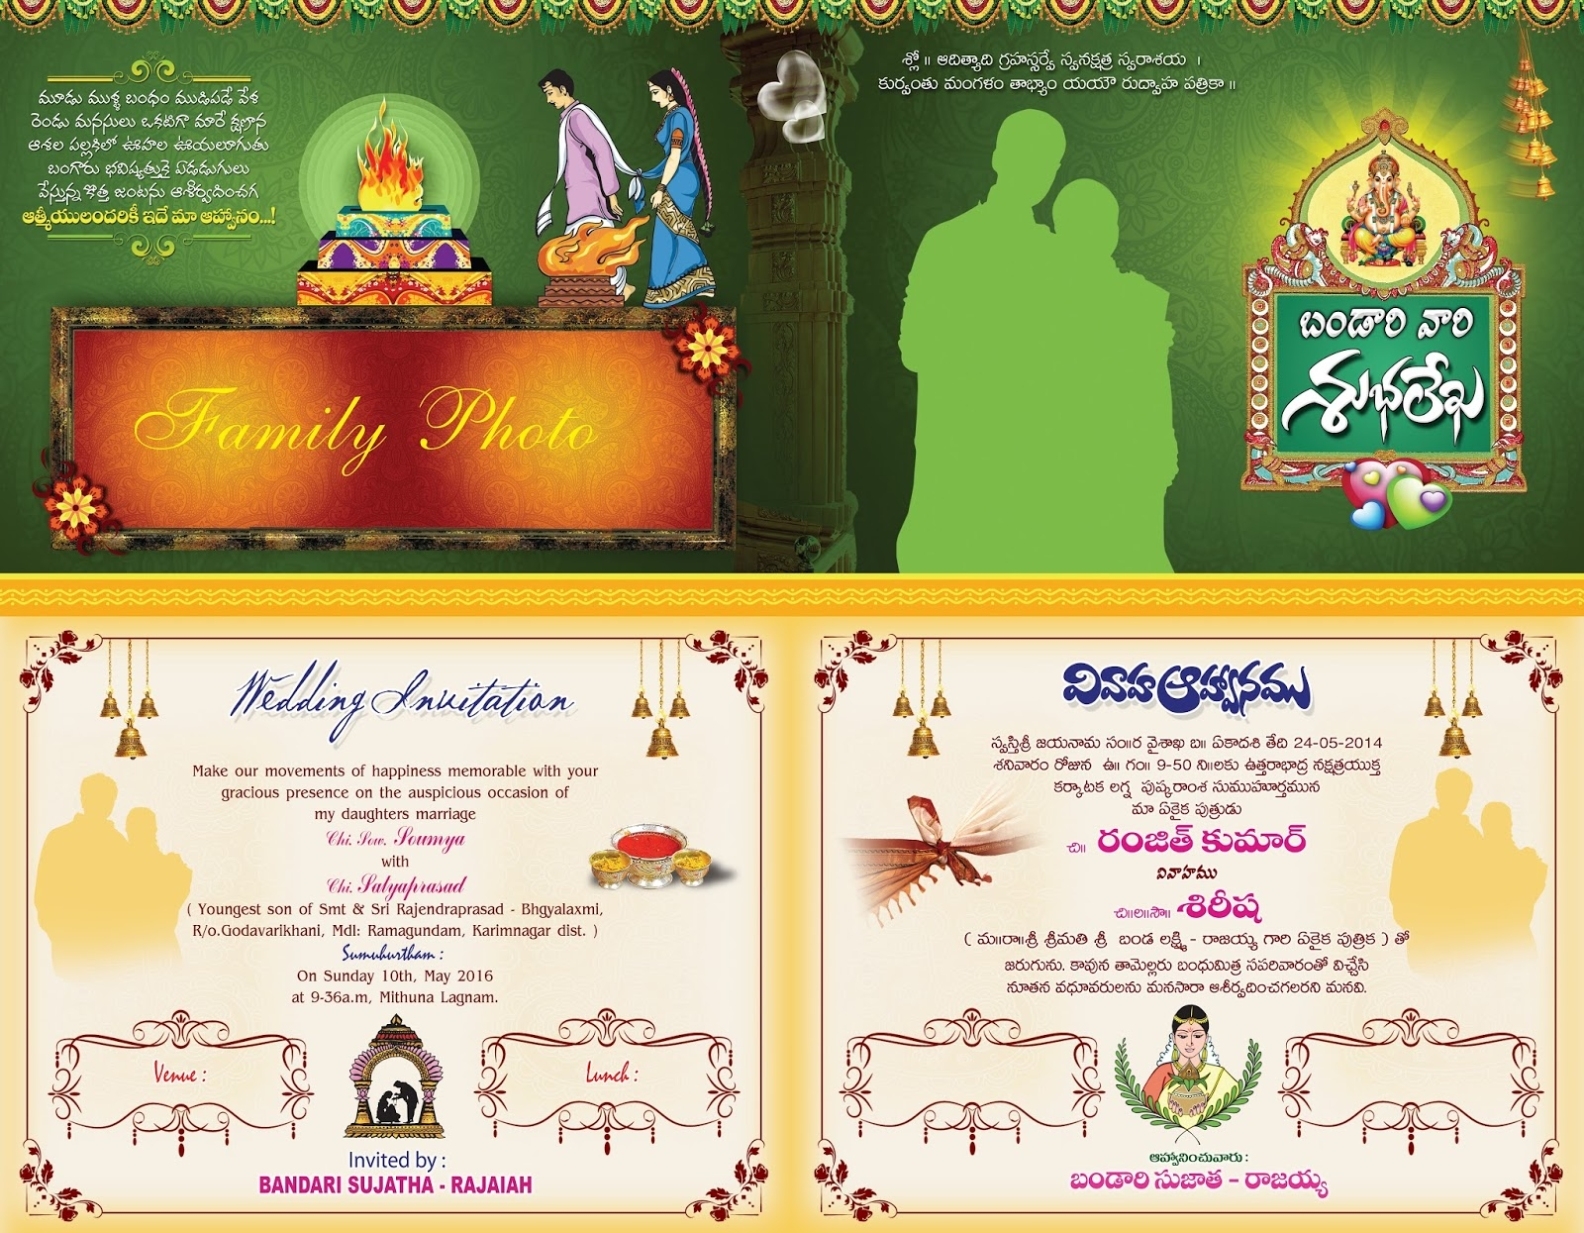 Indian Wedding Card Invitation Psd Templates Free Downloads | Naveengfx In Indian Wedding Cards Design Templates